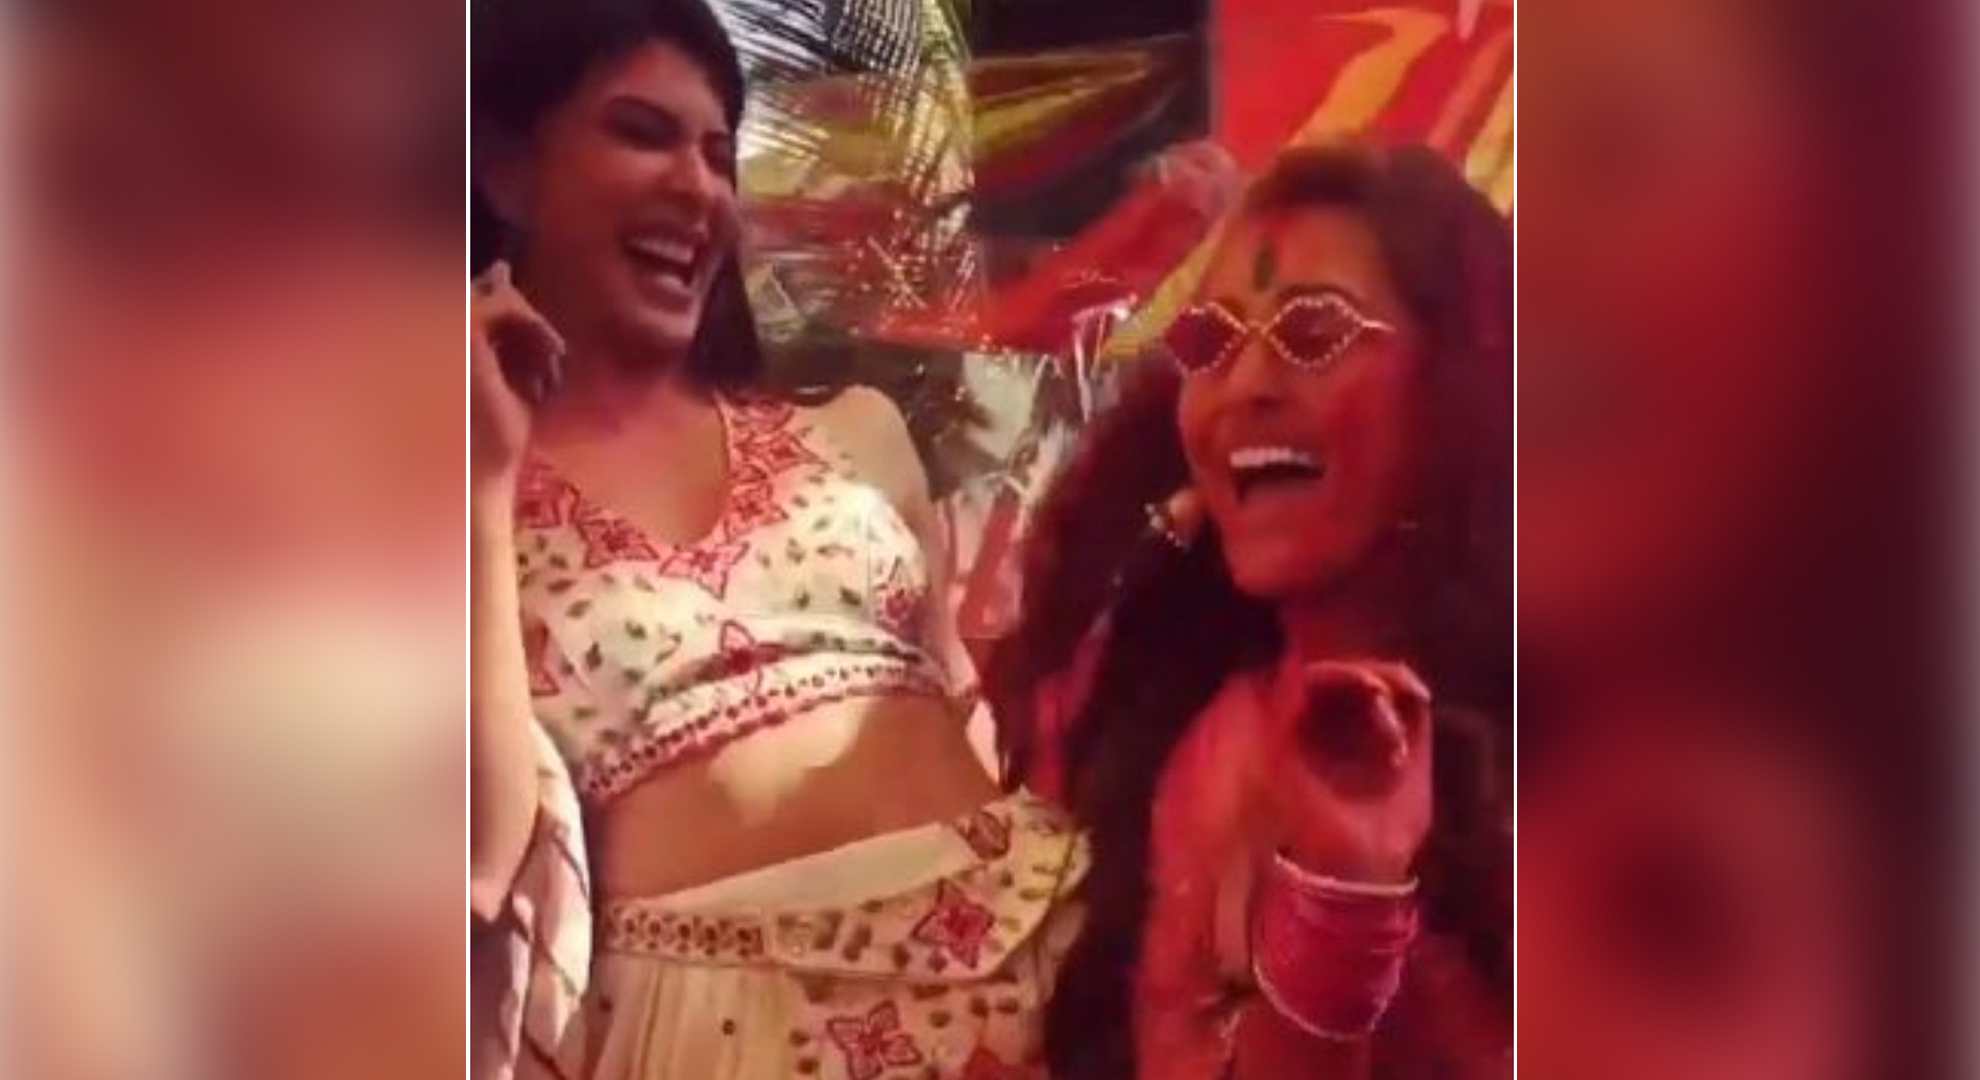 Urvashi Rautela and her best pal Jacqueline Fernandez sizzle the dance floor at a holi party